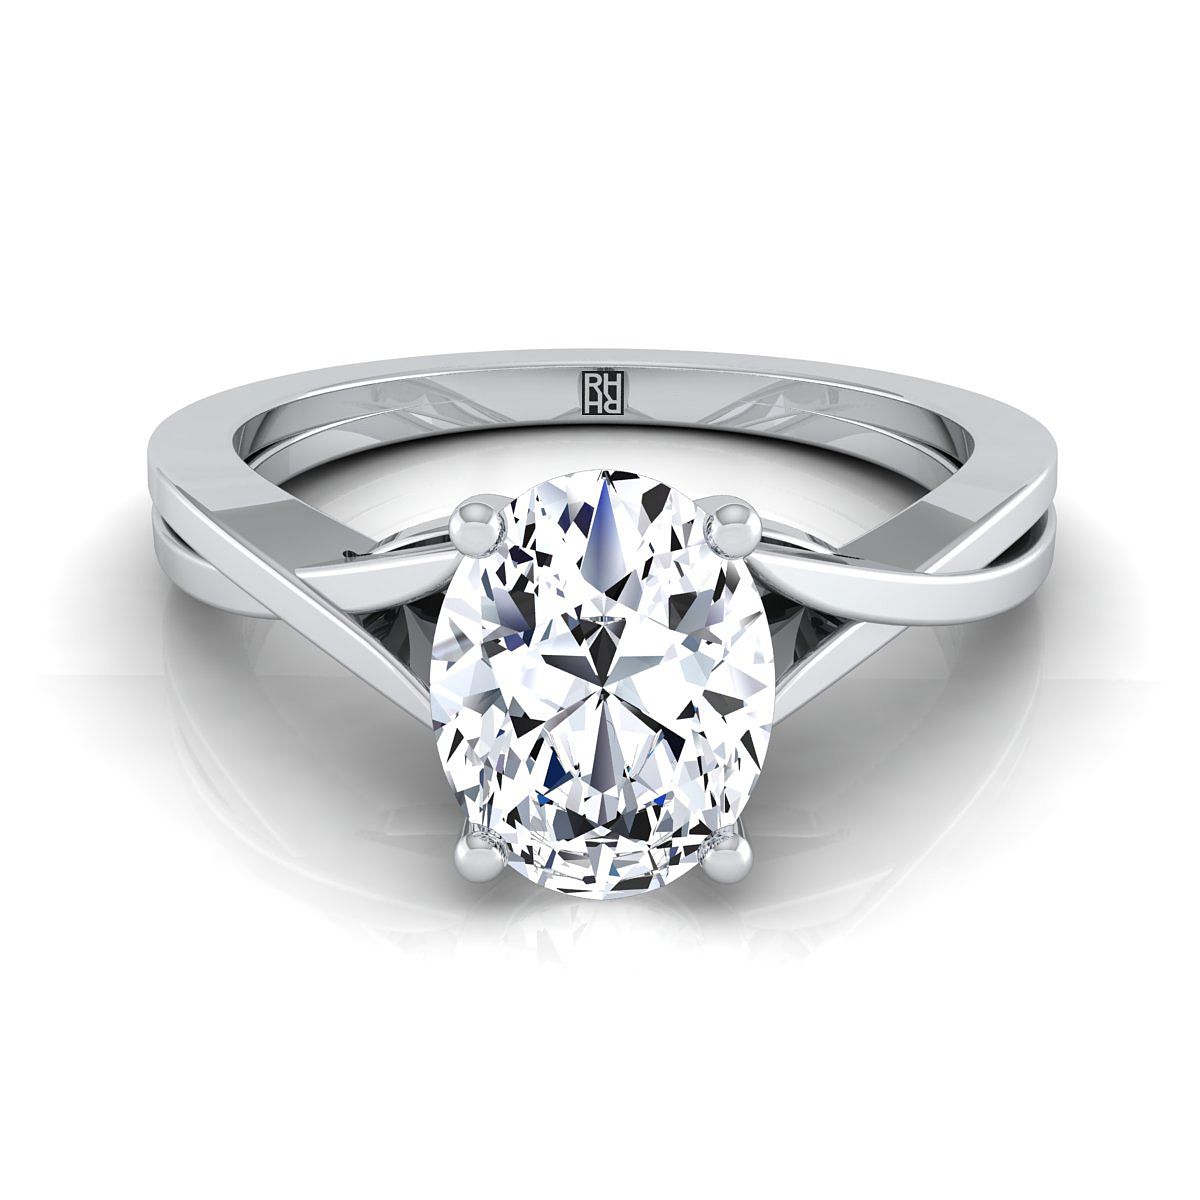 18K White Gold Oval Delicate Twist Solitaire Engagement Ring